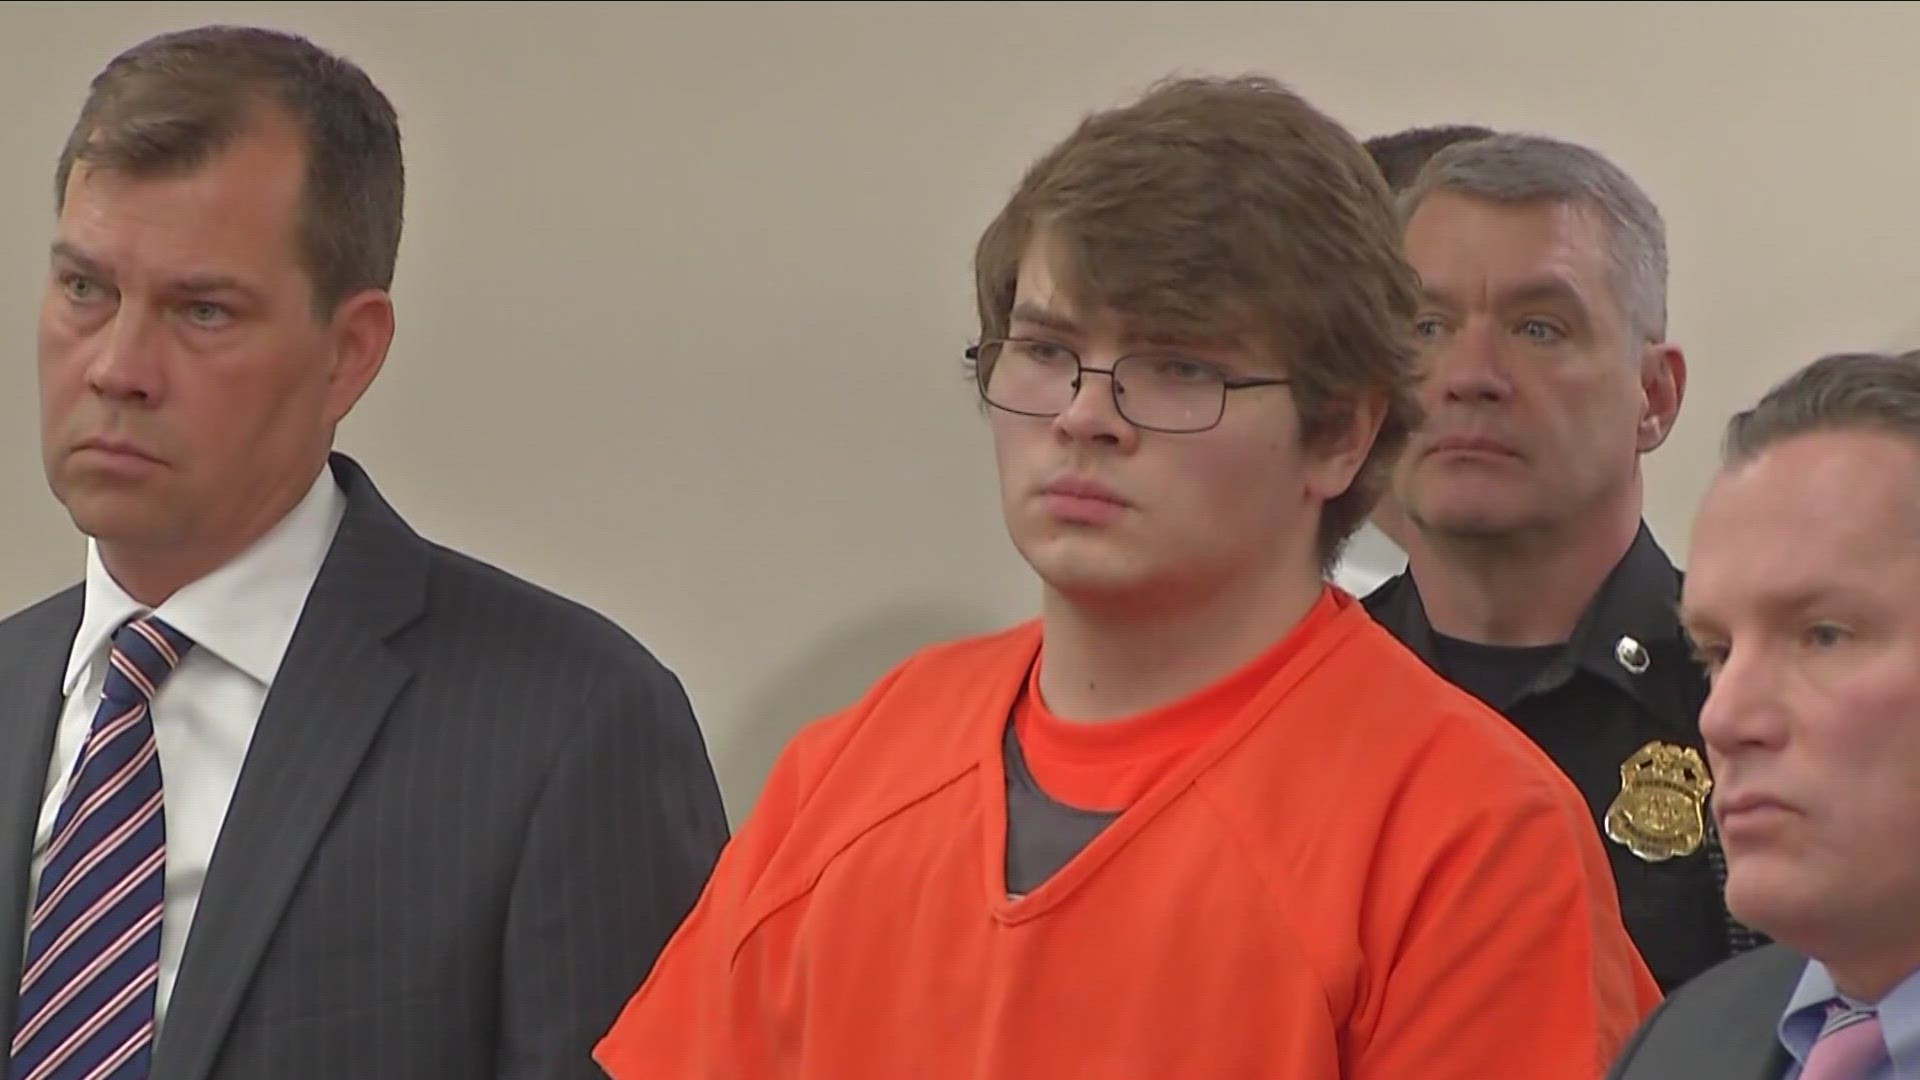 Lawyers for the 5-14 families contend teenage gunman payton gendron, through his use of social media, became exposed to racist ideology and "radicalized"